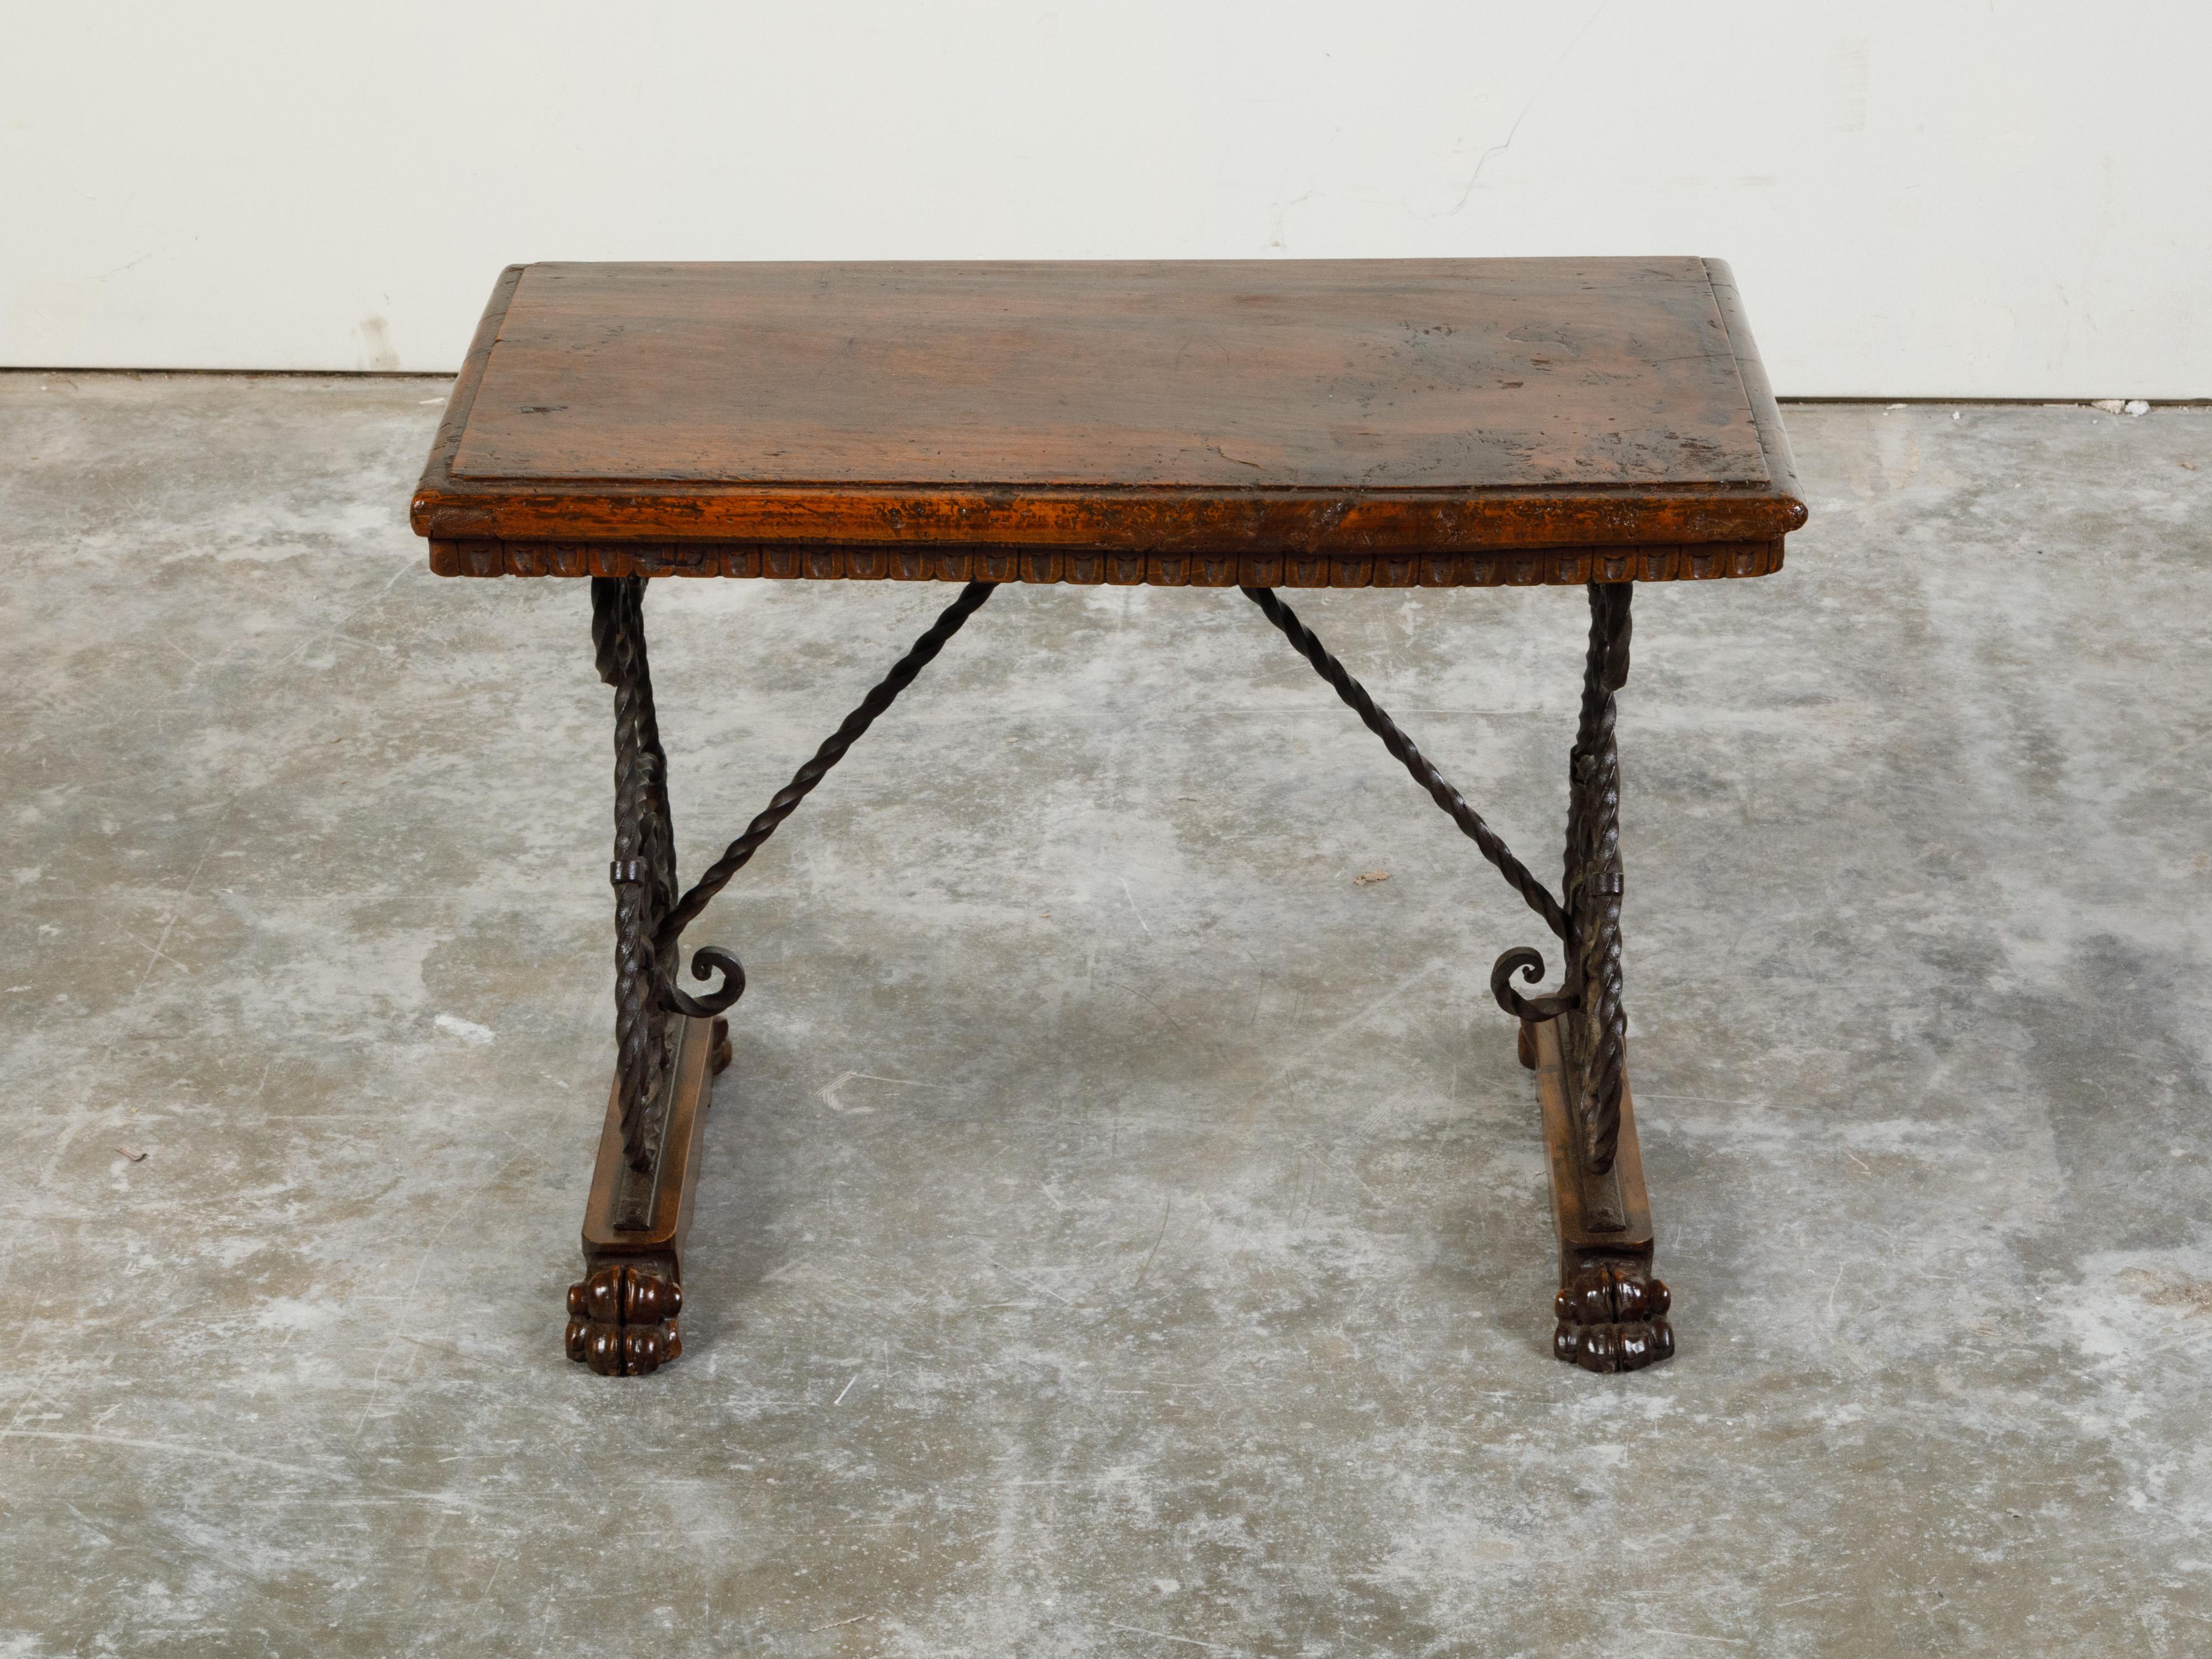 An Italian walnut and iron console table from the early 20th century, with scrolling base and fleur de lys motifs. Created in Italy during the early years of the 20th century, this console table features a rectangular wooden top with carved scoop